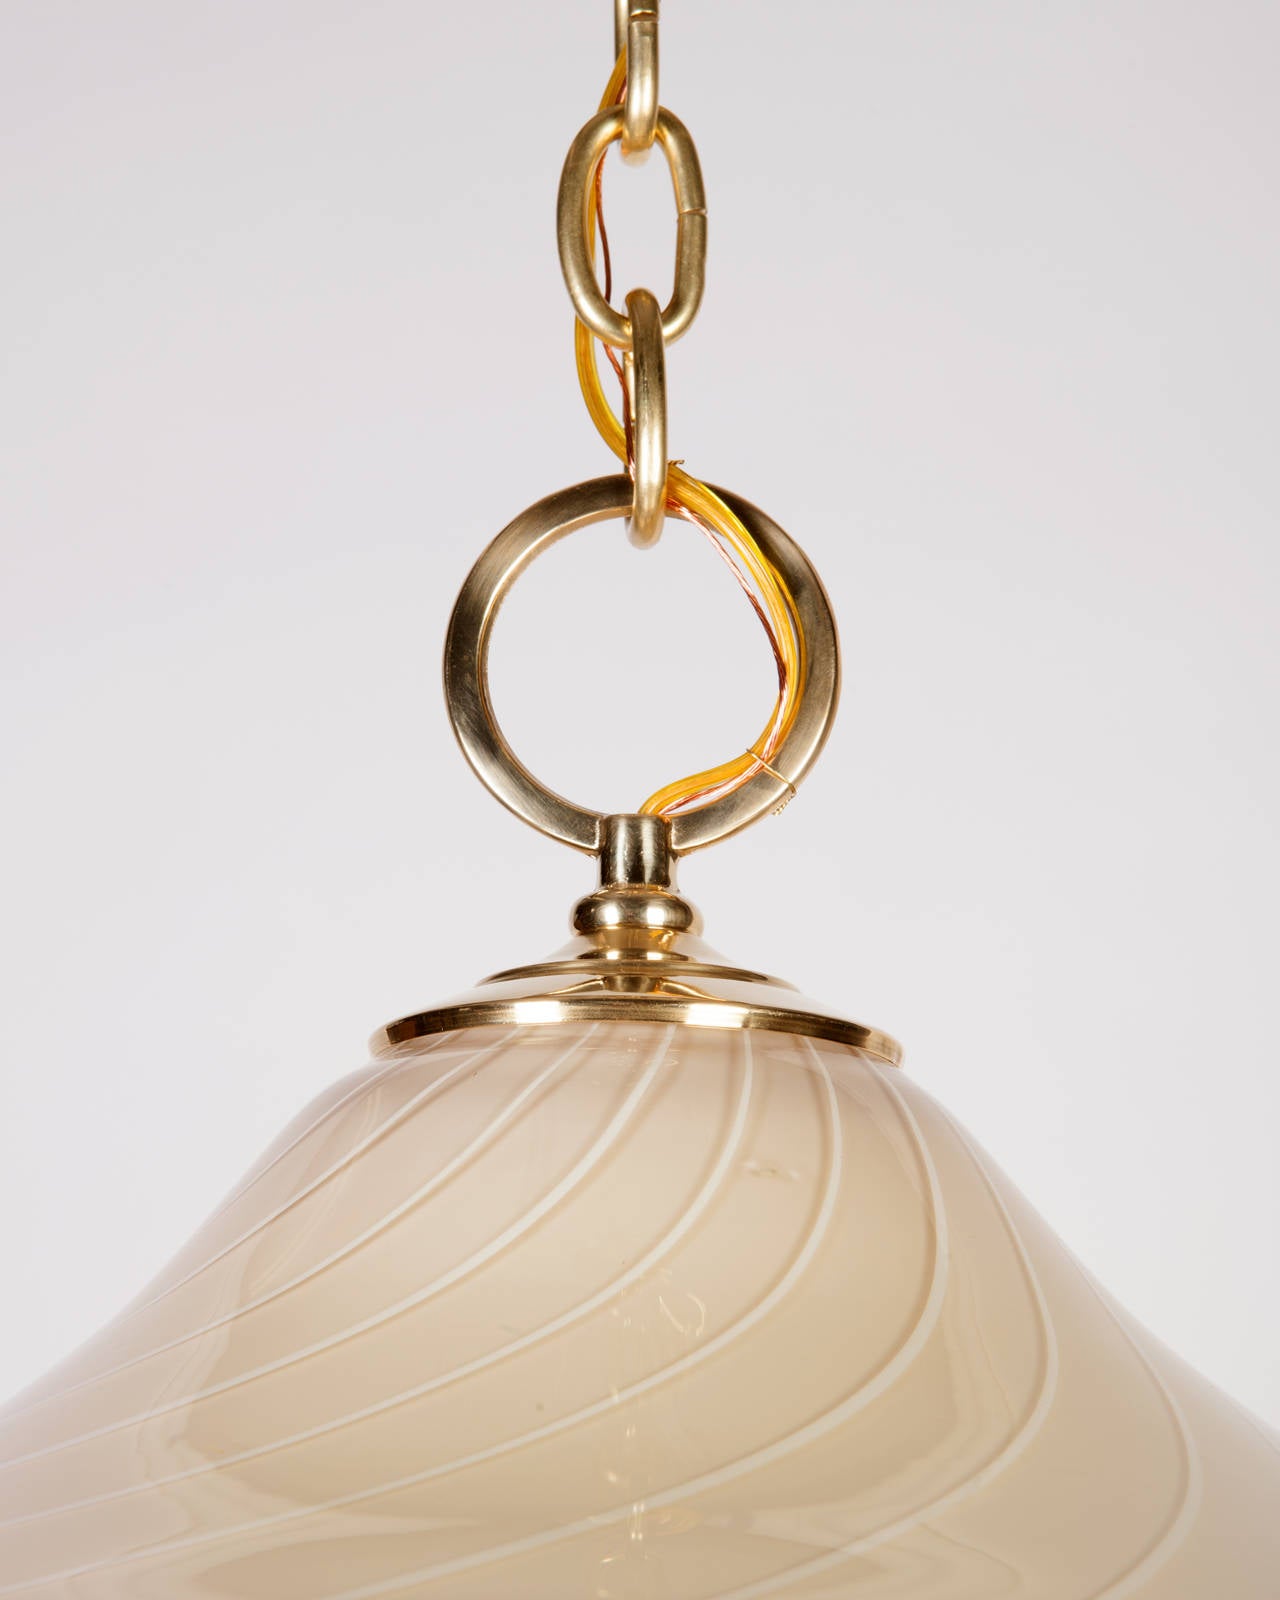 Polished Murano Glass Pendant with White Pinstripes on Brass Fittings, Italian Made 1970s